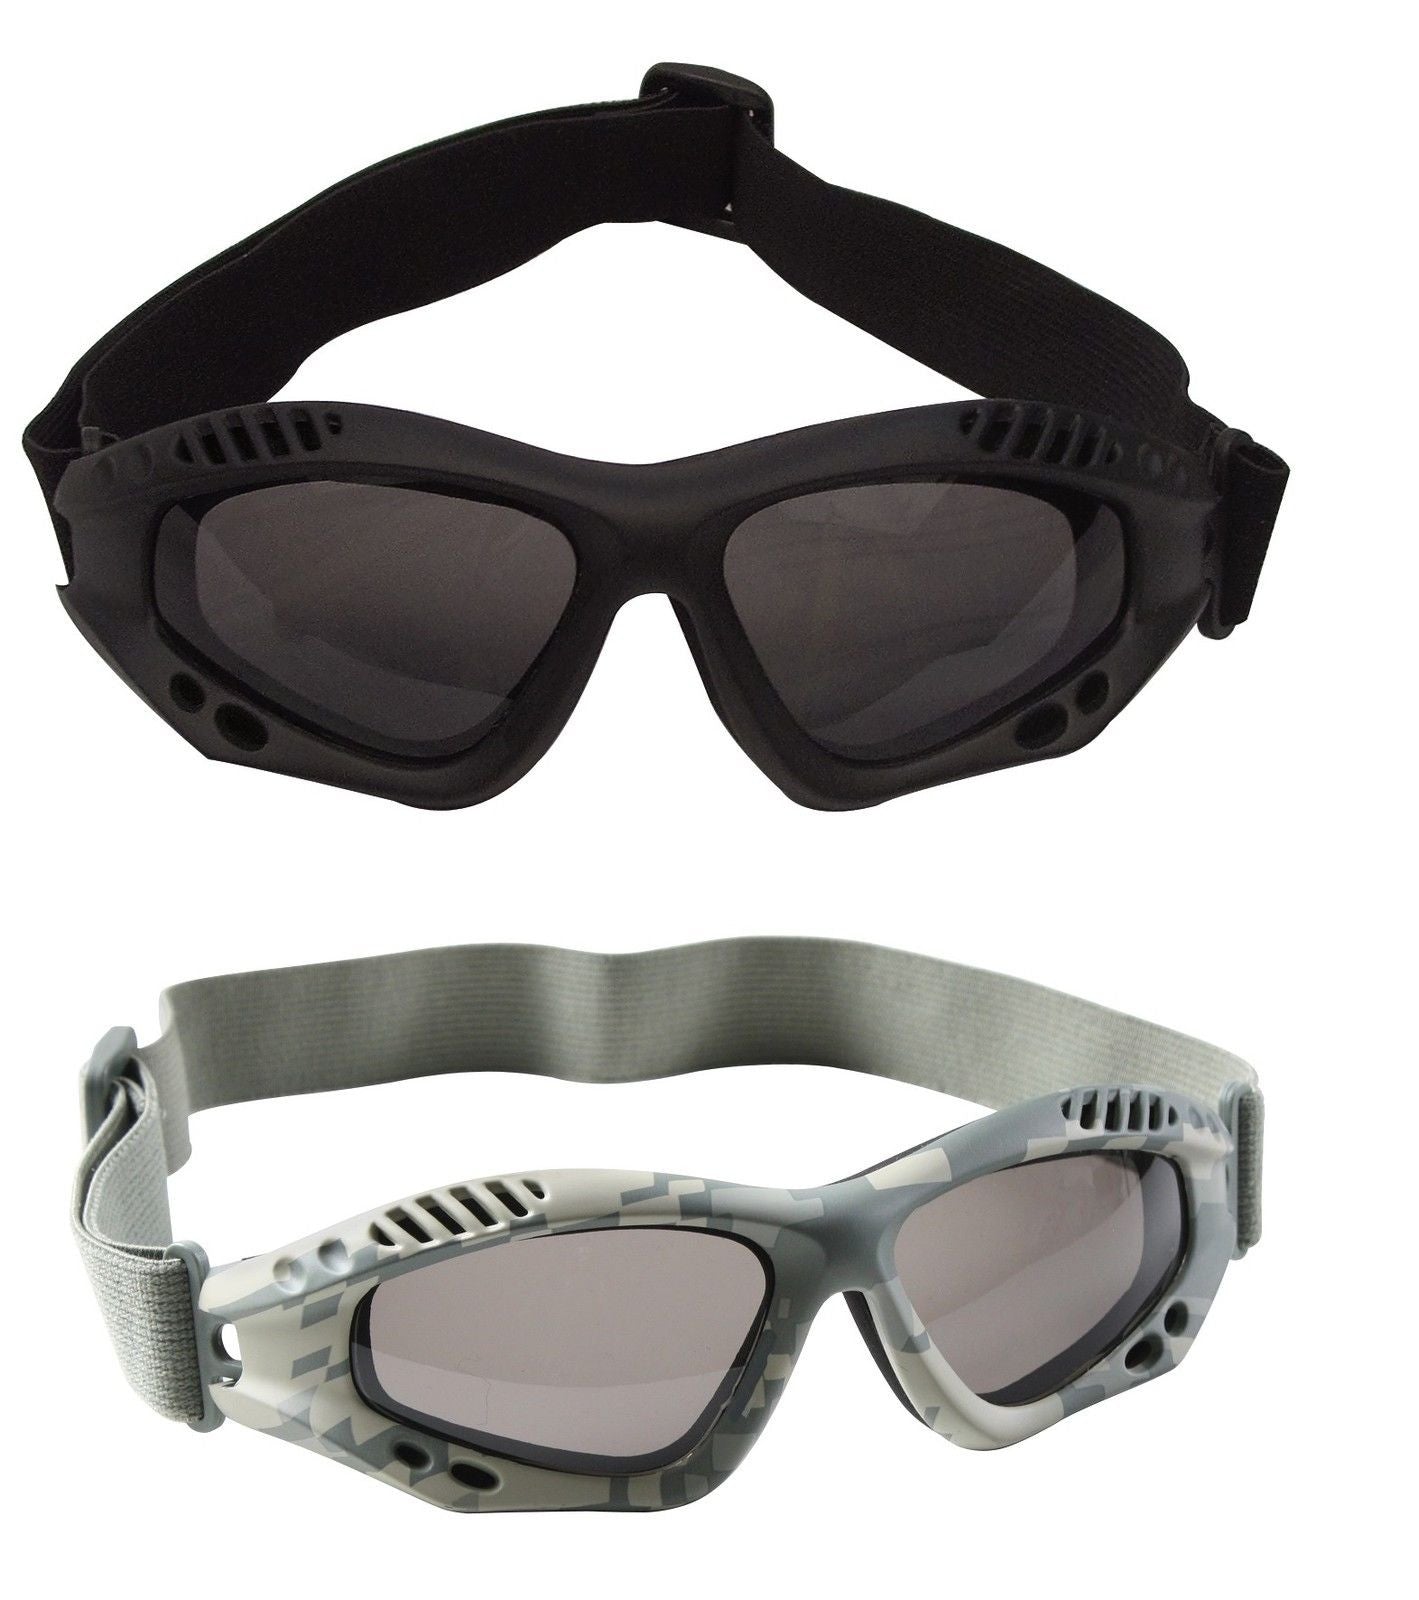 Rothco Ventec Tactical Goggles - Paintball Hunting and Outdoor Tactical Goggles